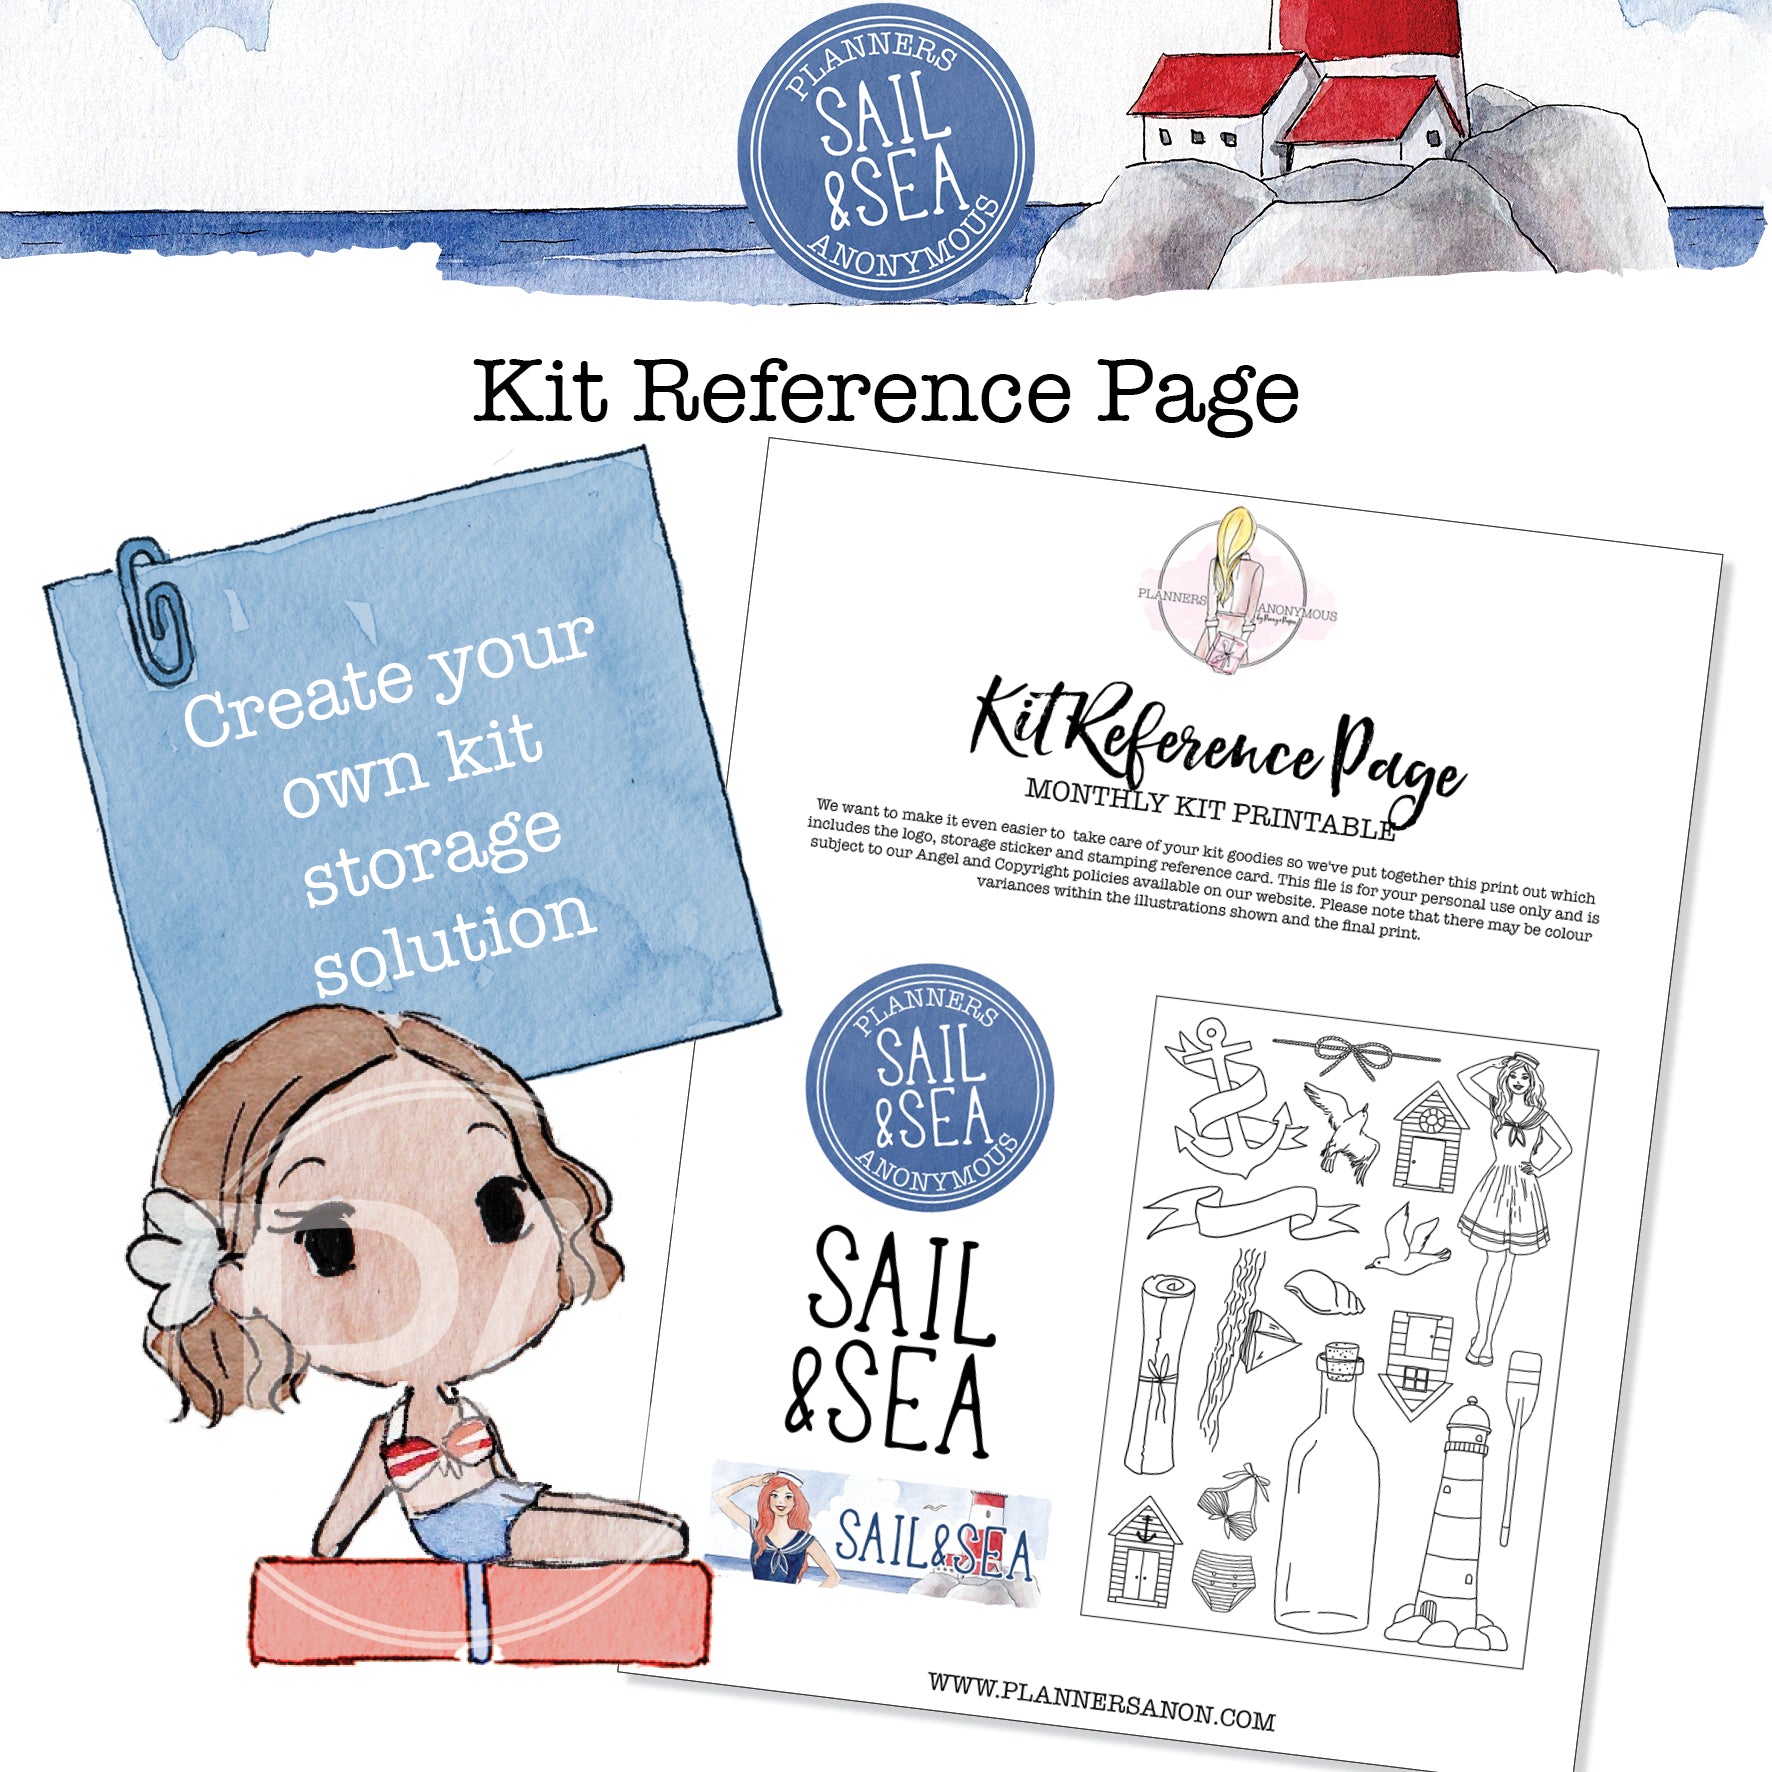 Sail and Sea Kit Reference Page